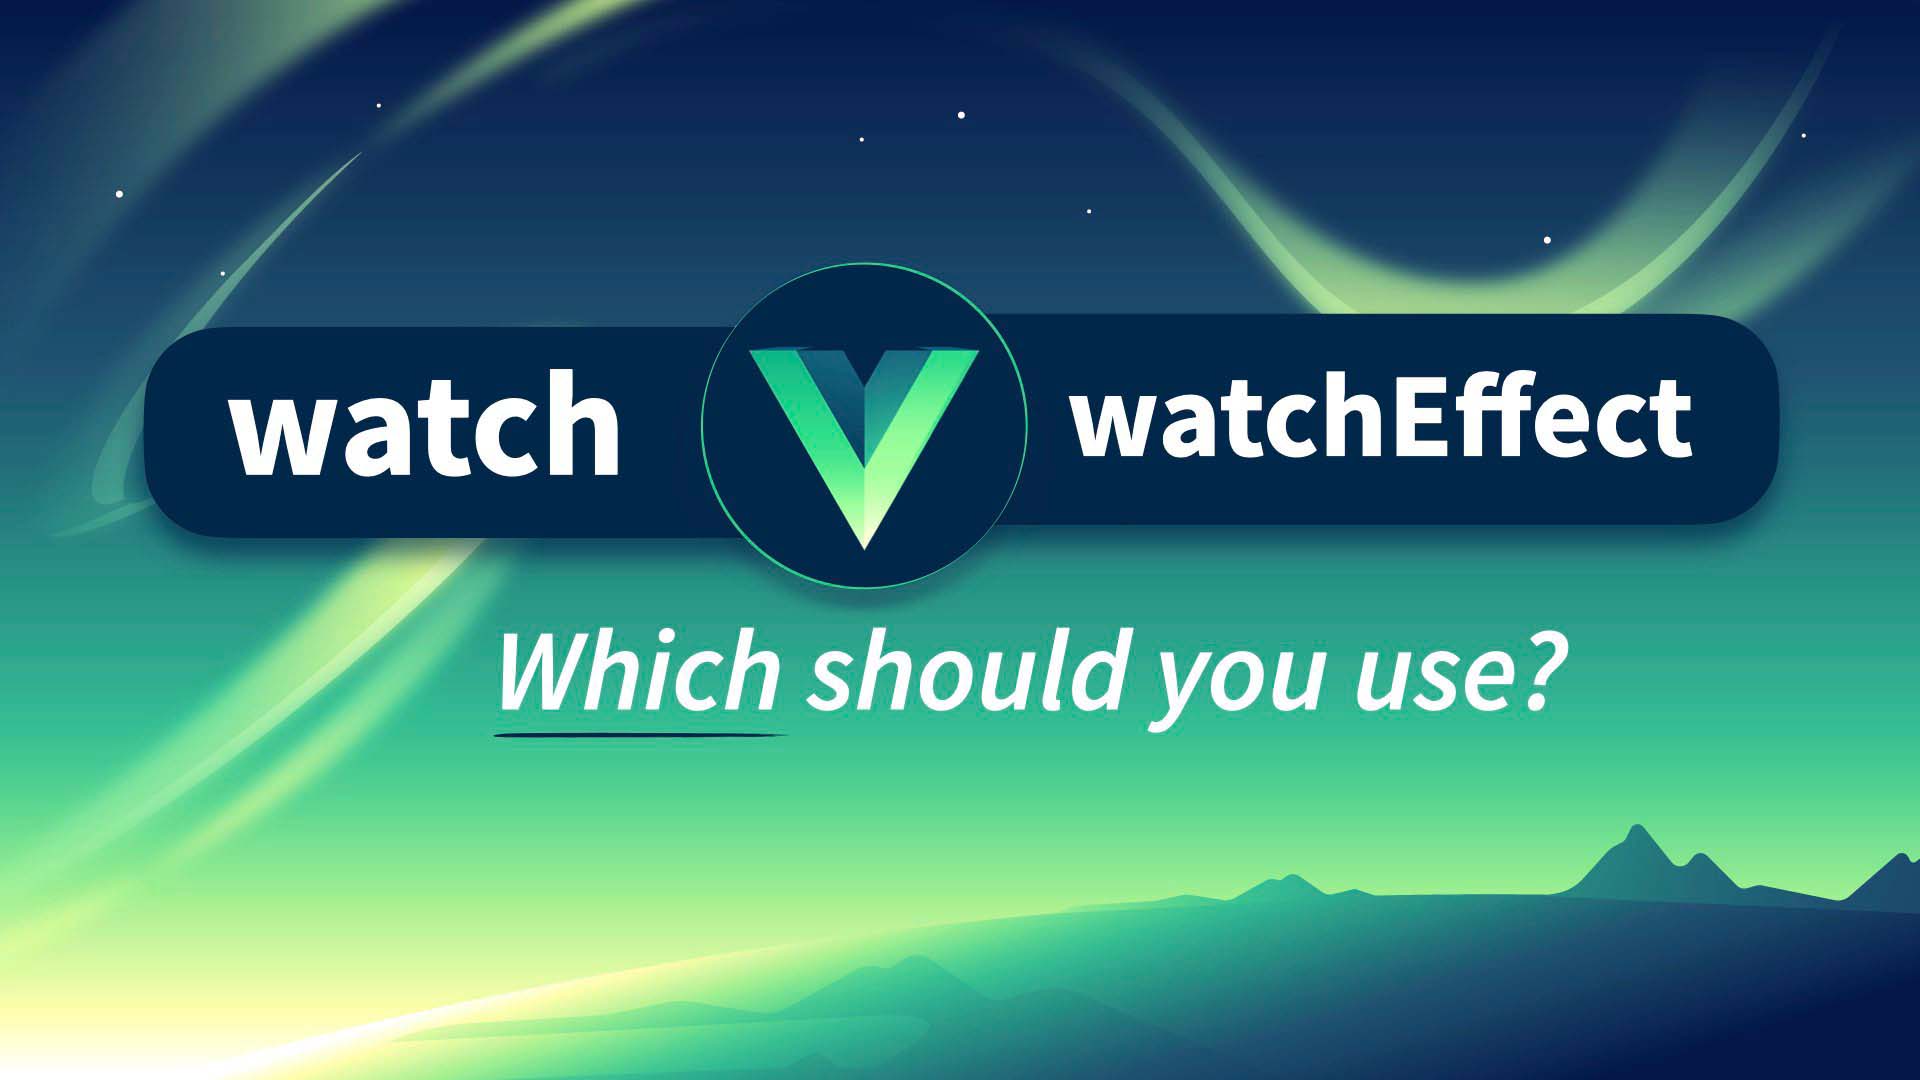 Vue’s watch vs watchEffect, which should I use?